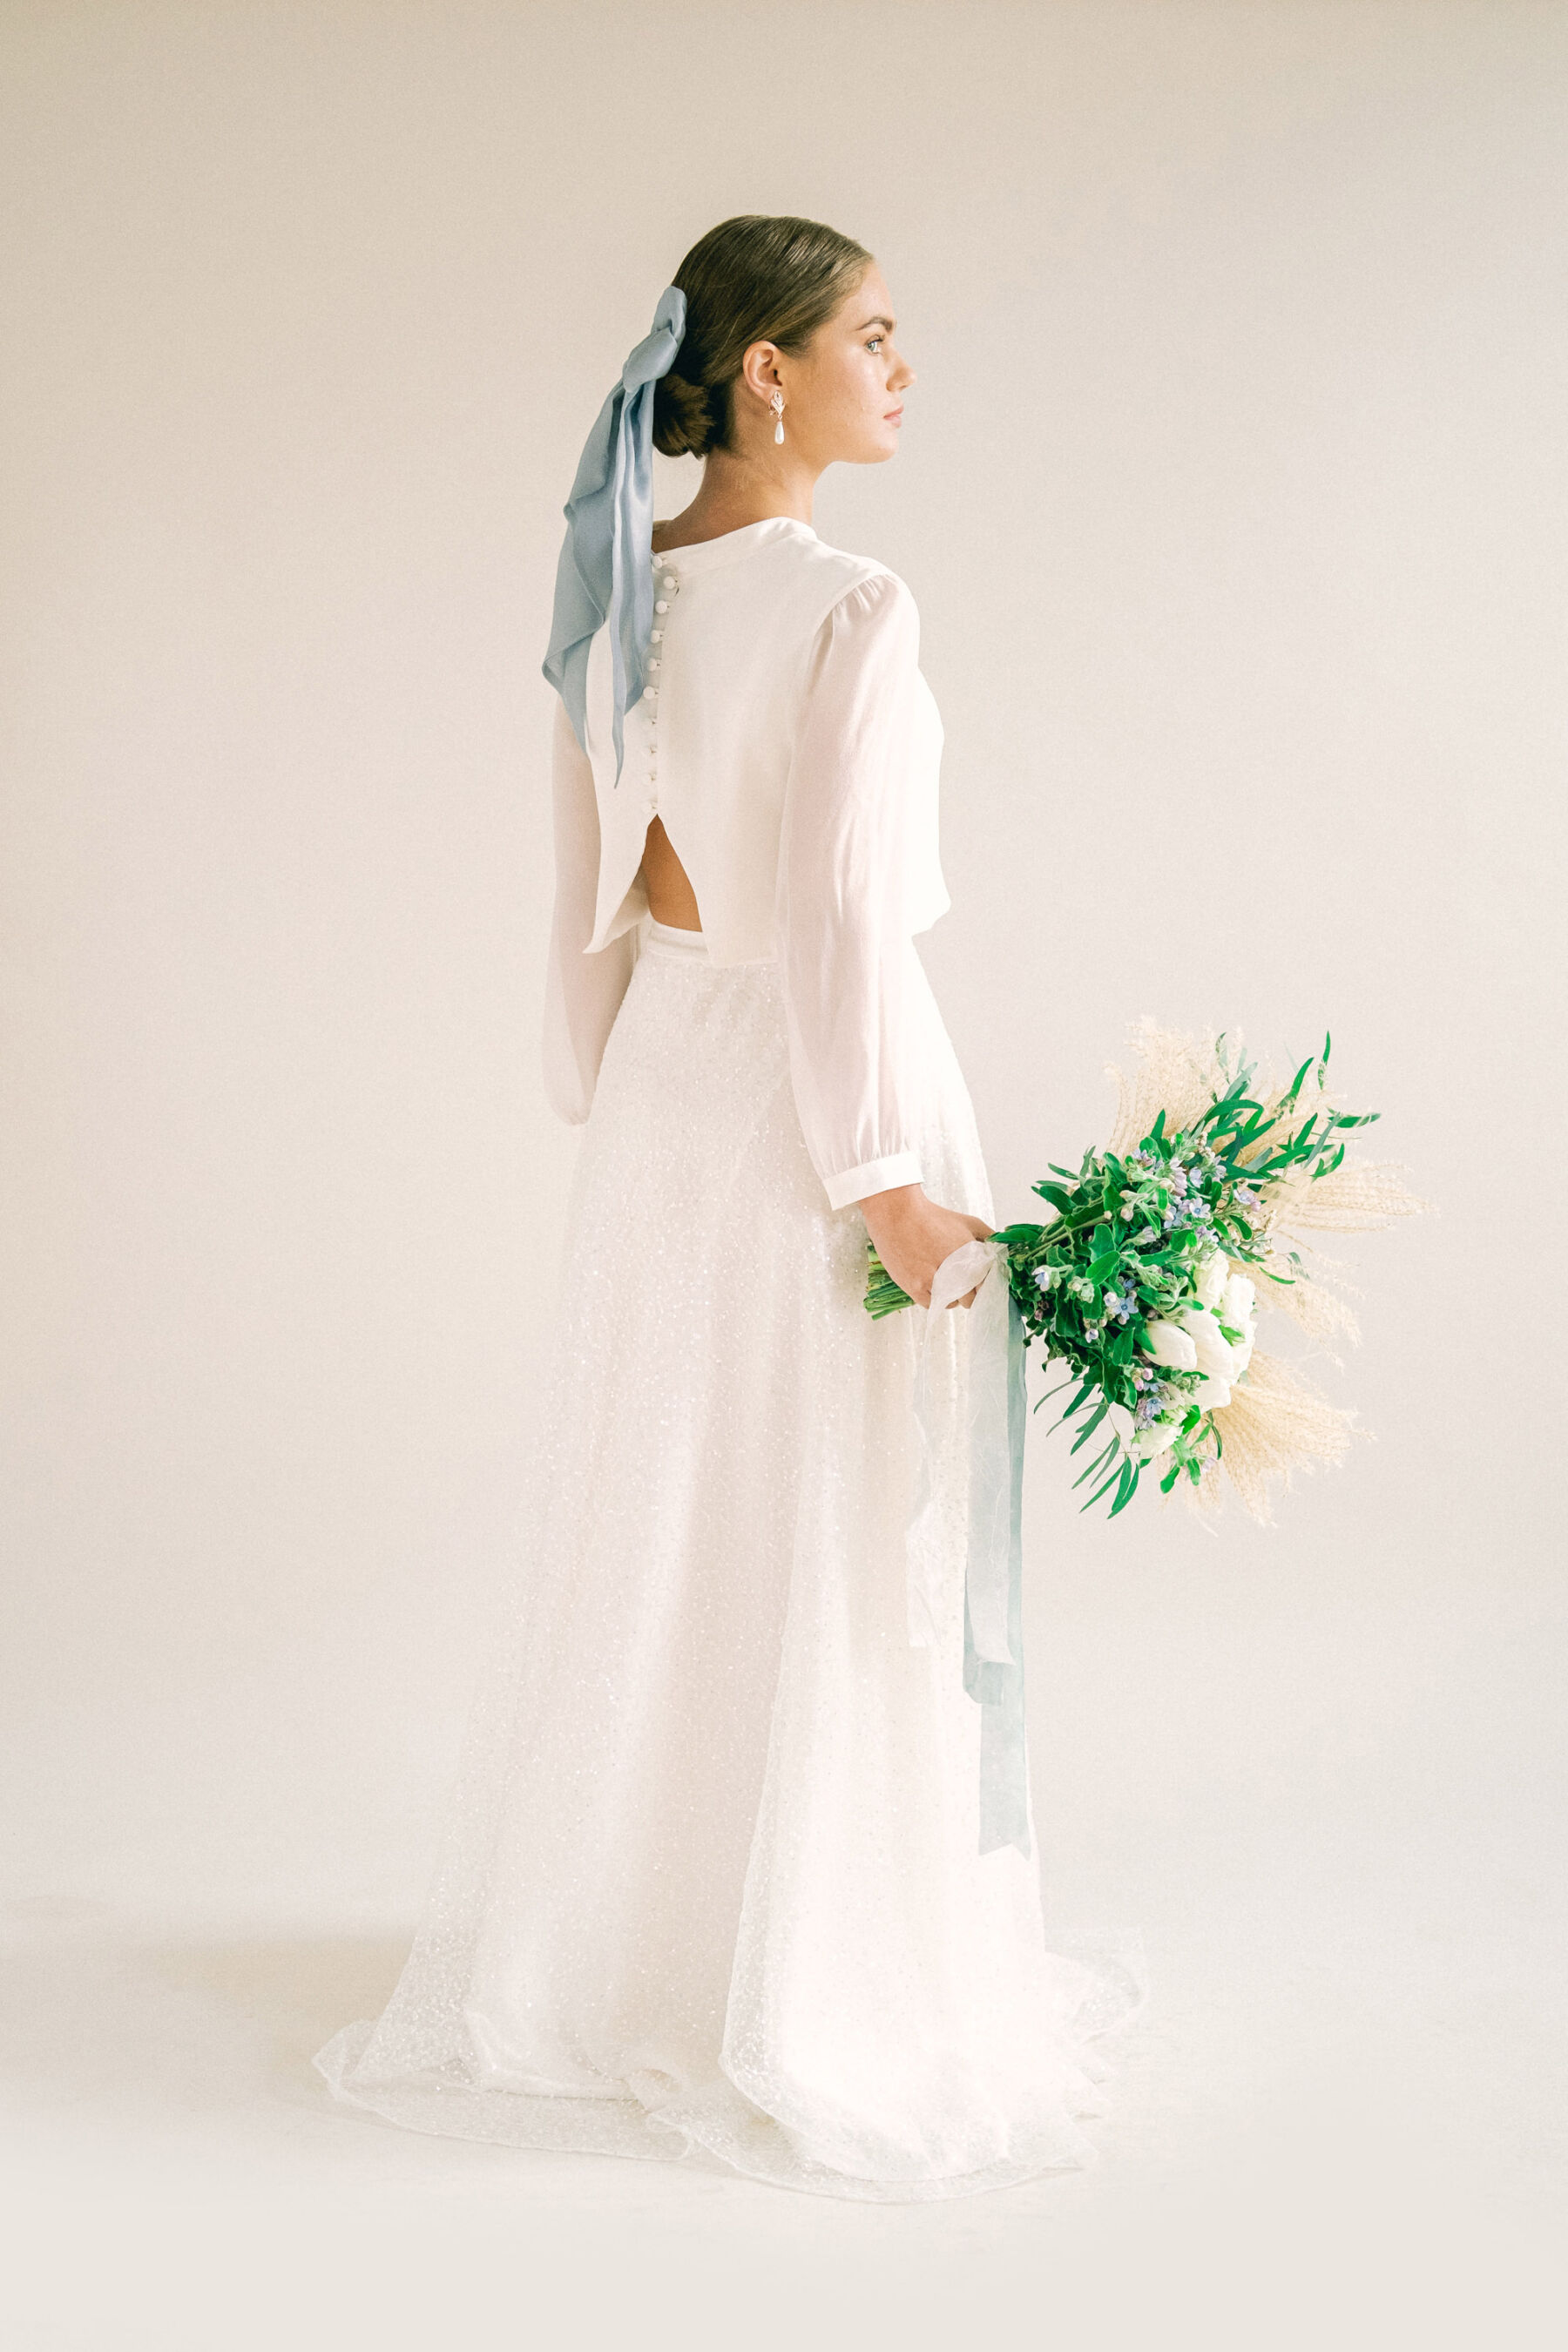 Bride wearing top and skirt bridal separates by Kate Halfpenny. Silk blue ribbon in her hair & carrying a wedding bouquet of mostly greenery with white and blue flowers.